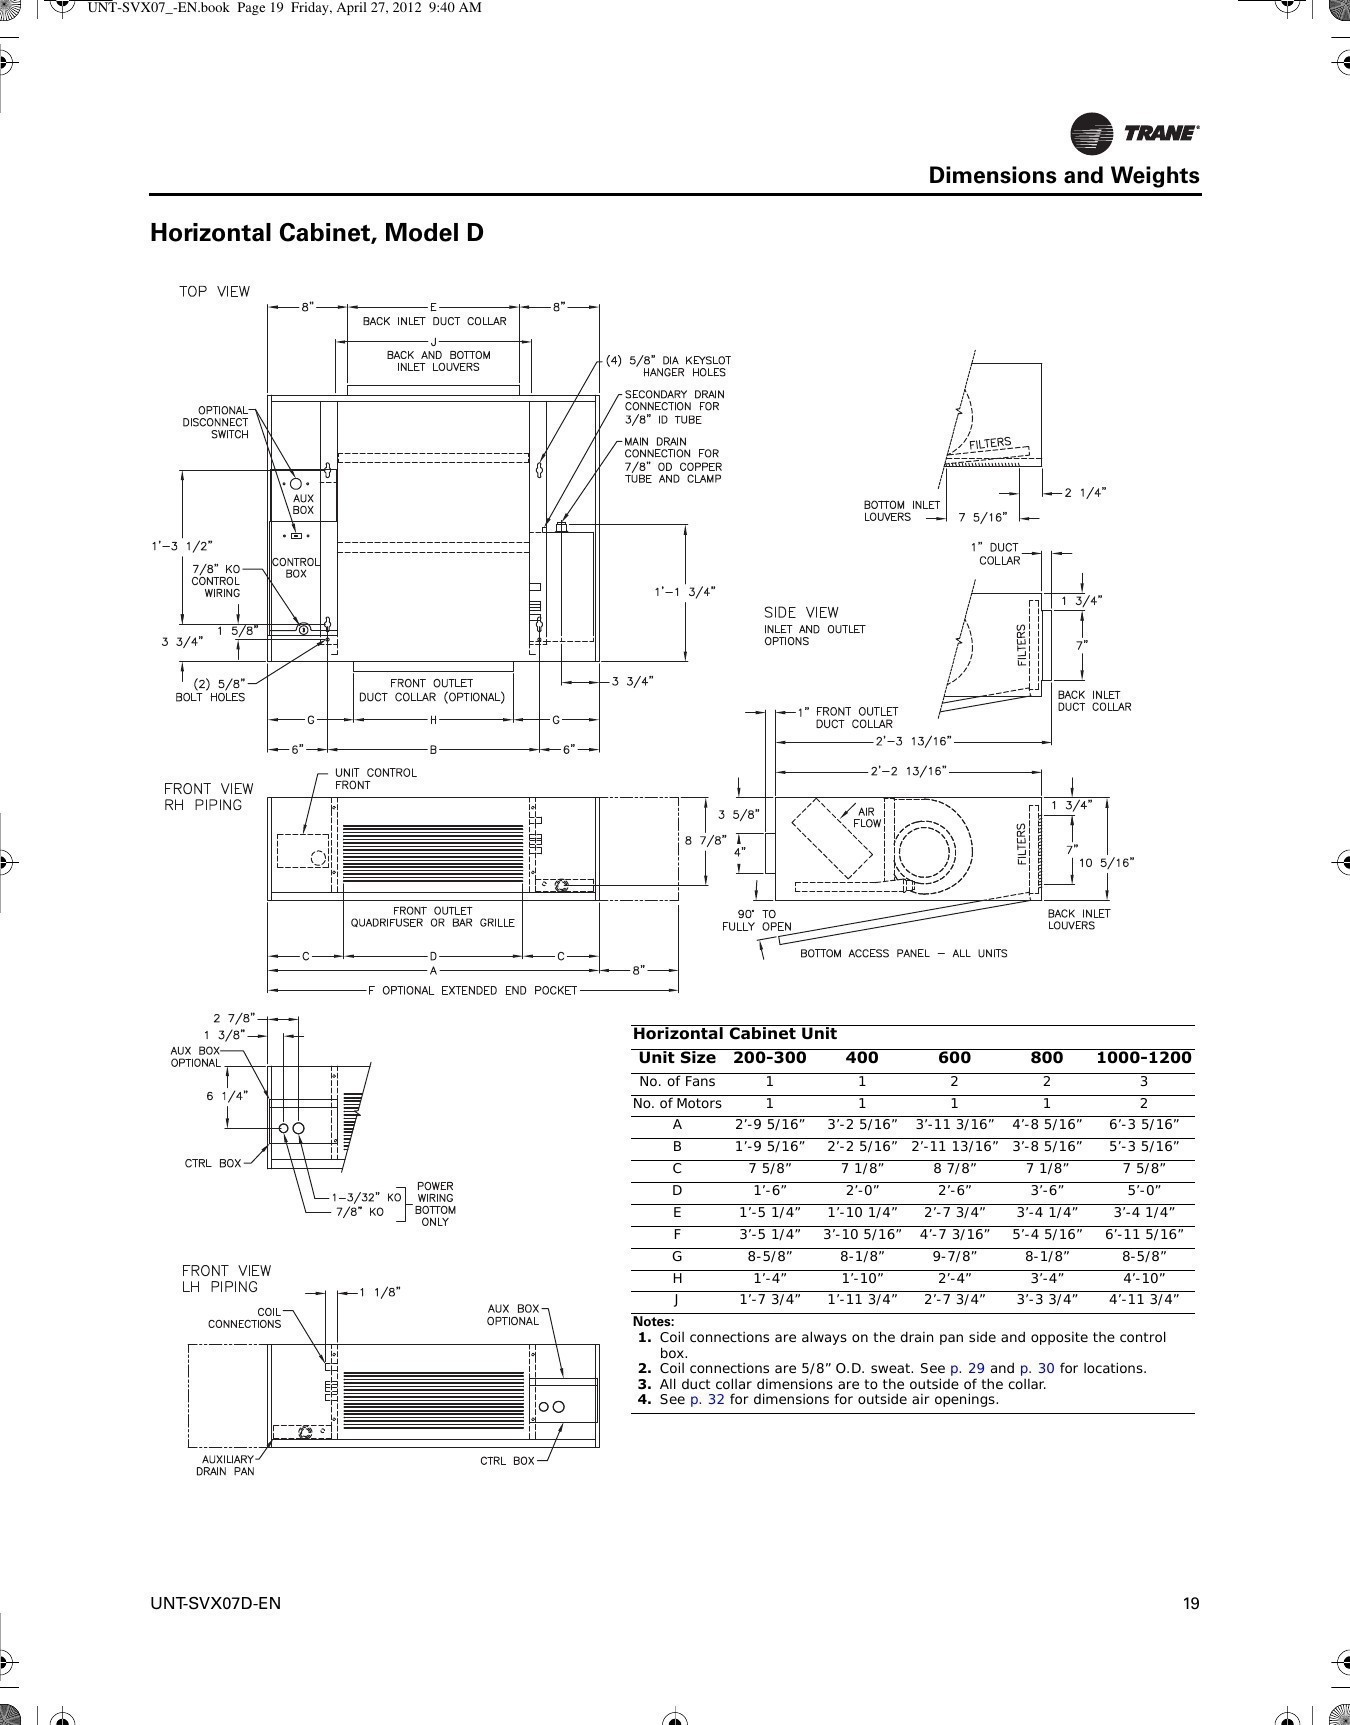 Wiring Diagram for A Honeywell thermostat Honeywell T87n1000 Wiring Diagram Of Wiring Diagram for A Honeywell thermostat